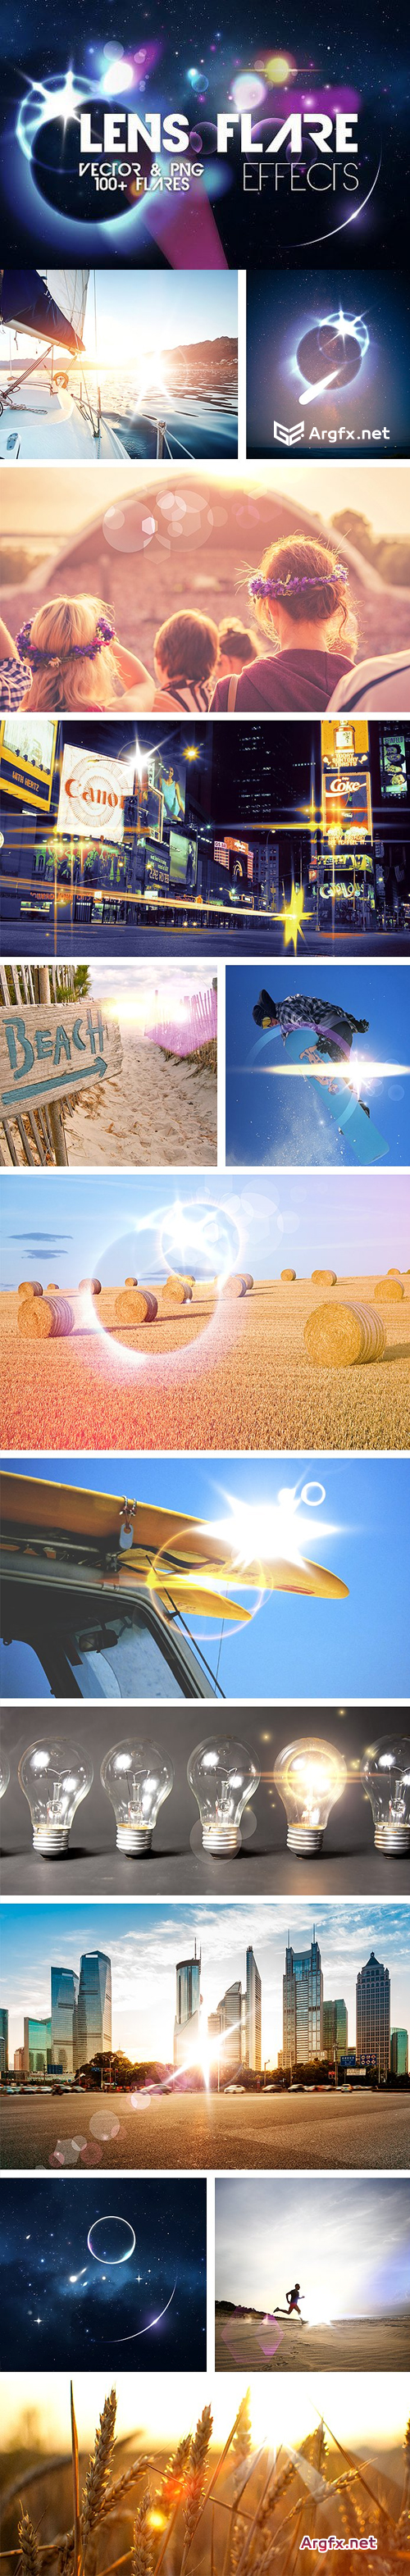 100 Lens Flare Effects